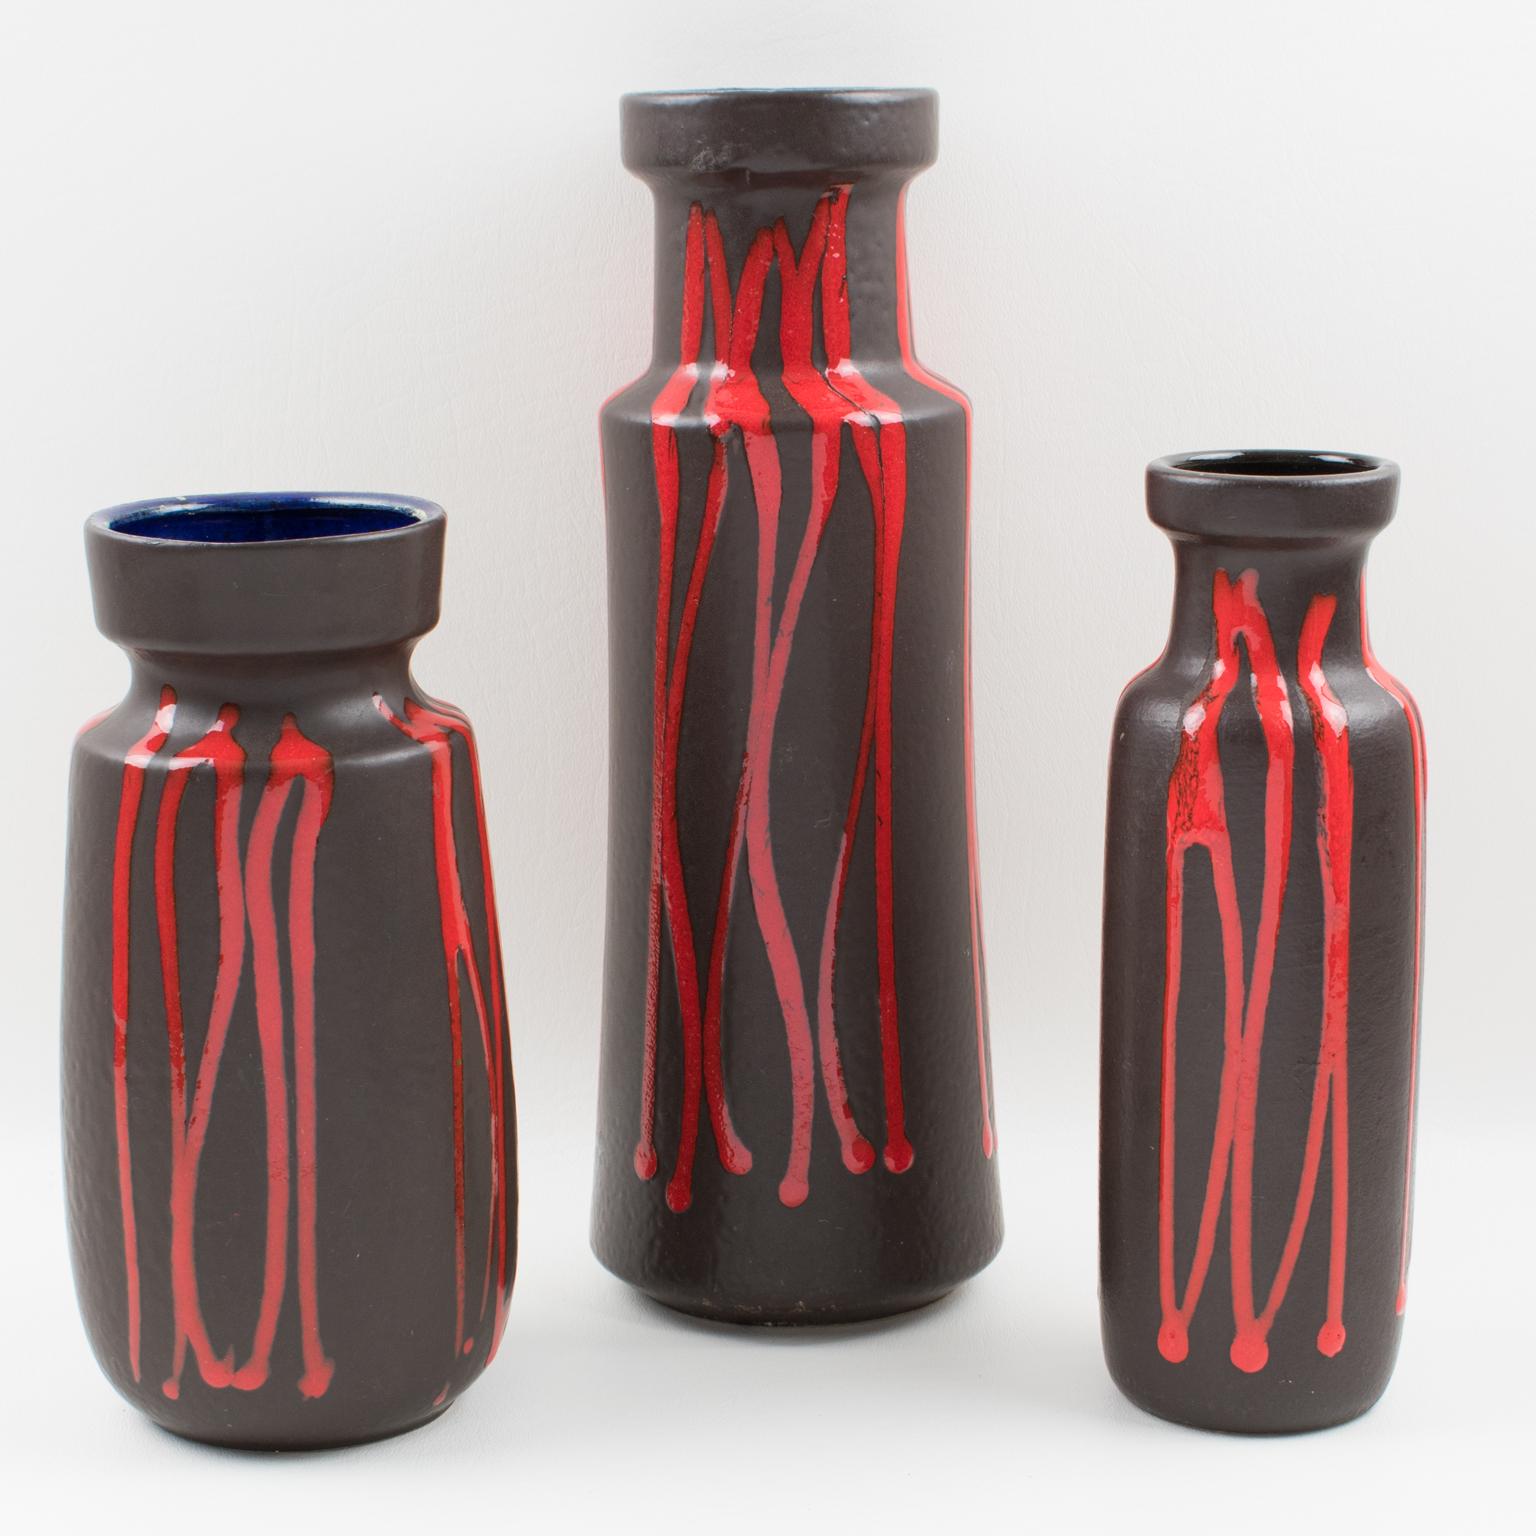 Vibrant Mid-Century Modern West Germany Scheurich Keramic set of three pottery vases in hickory black color with bright red lava glaze finish. Each vase has a specific design with strong contrasting colors and graphic patterns. Vases are all signed